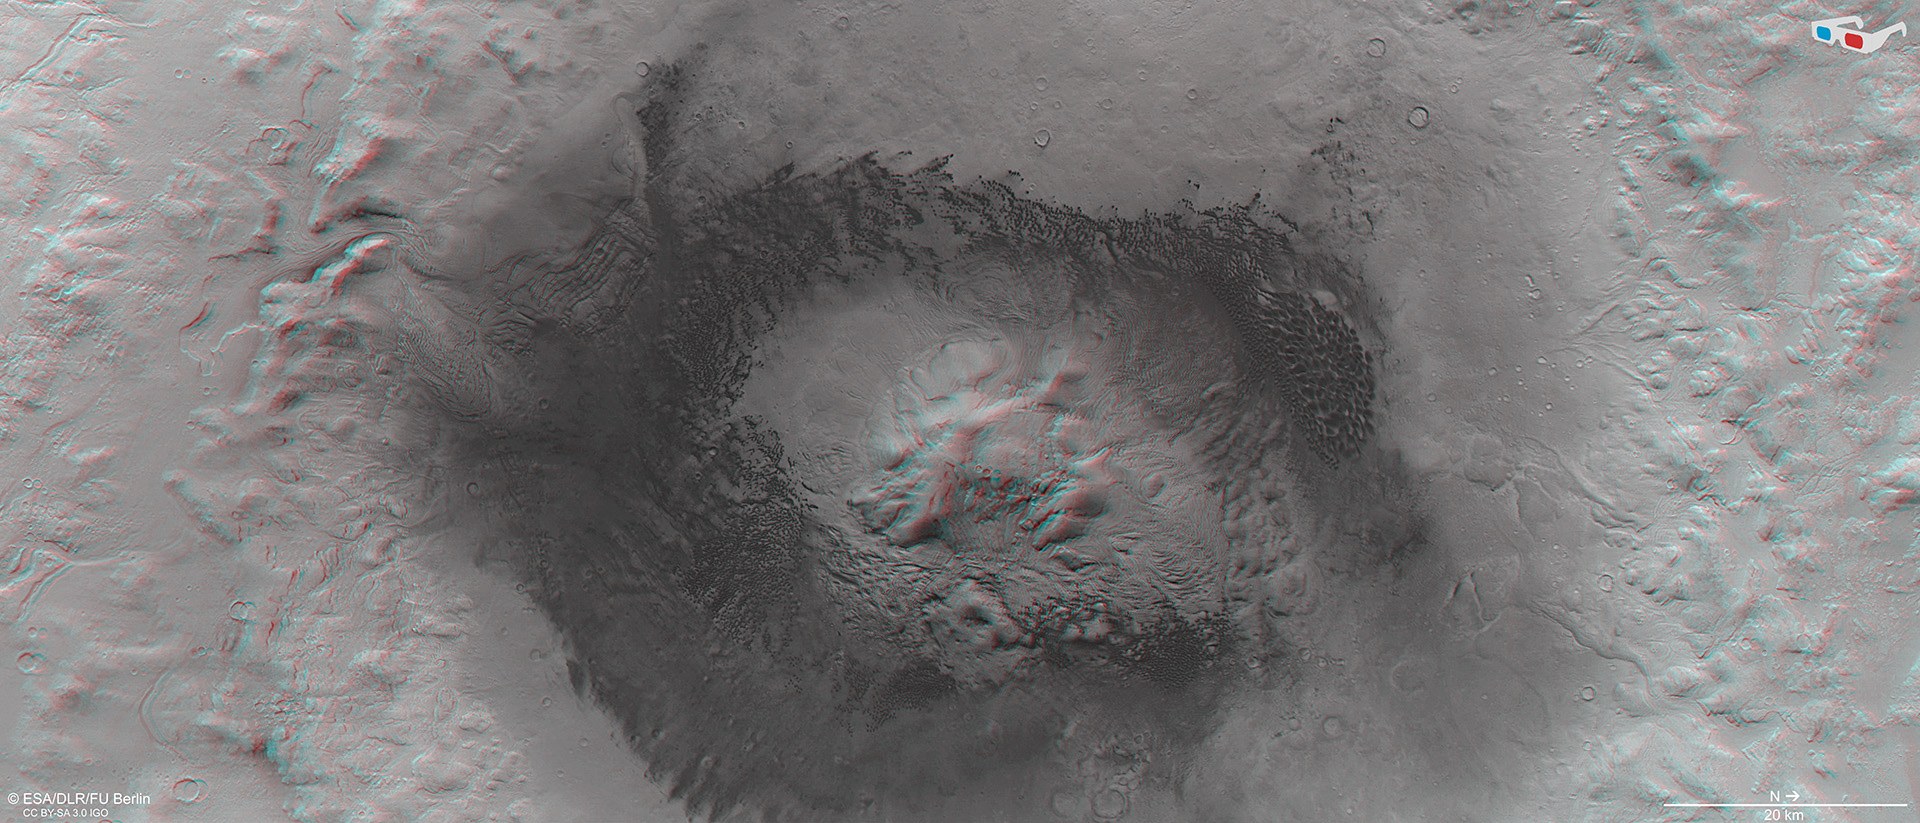 3D view of the Moreux impact crater in Protonilus Mensae